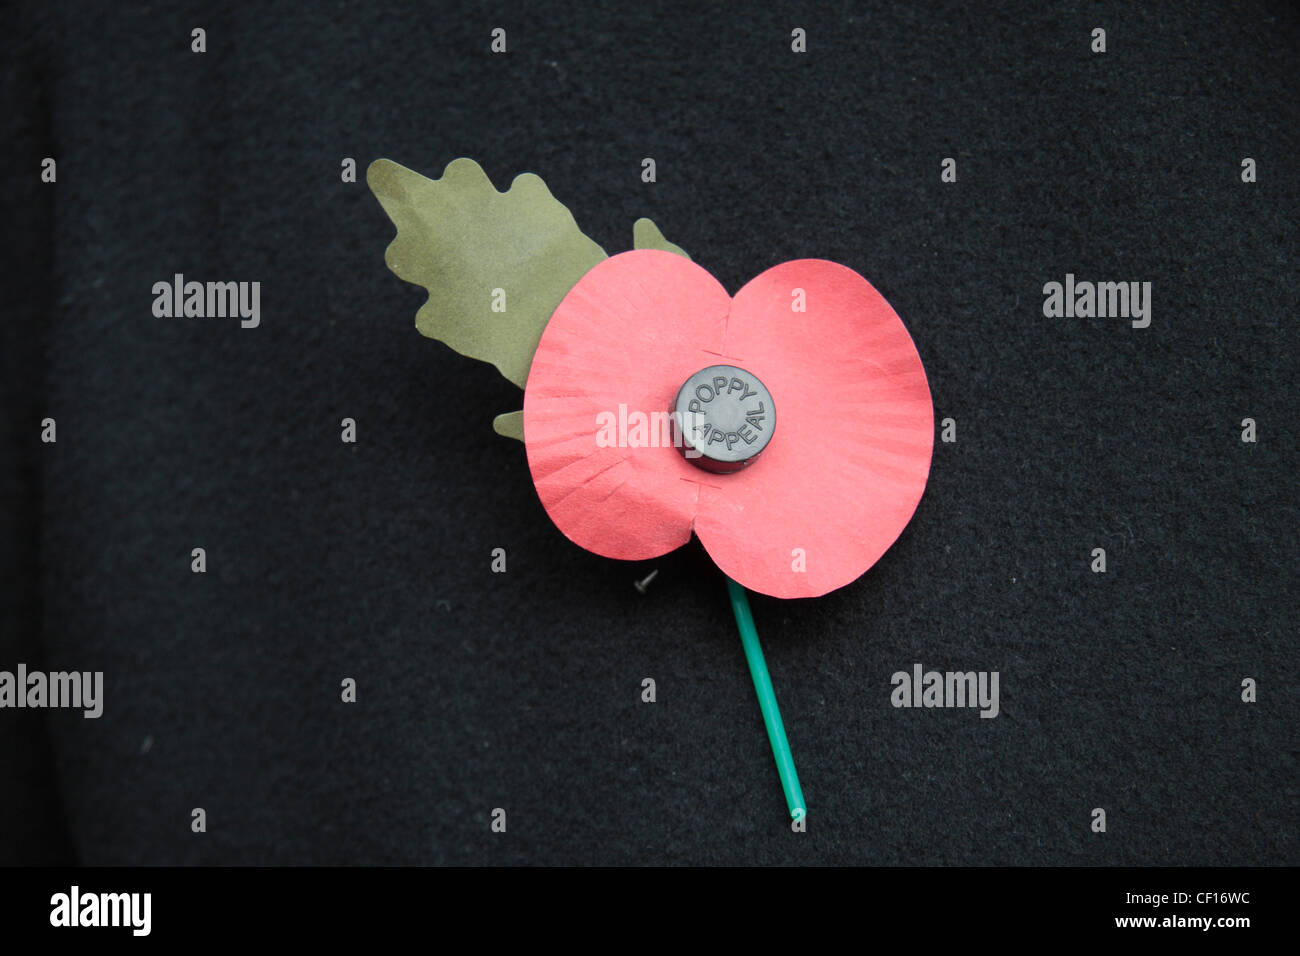 An English artificial Royal British Legion Red Poppy on a dark jacket background.  This shows the green leaf pointing up. (11am) Stock Photo